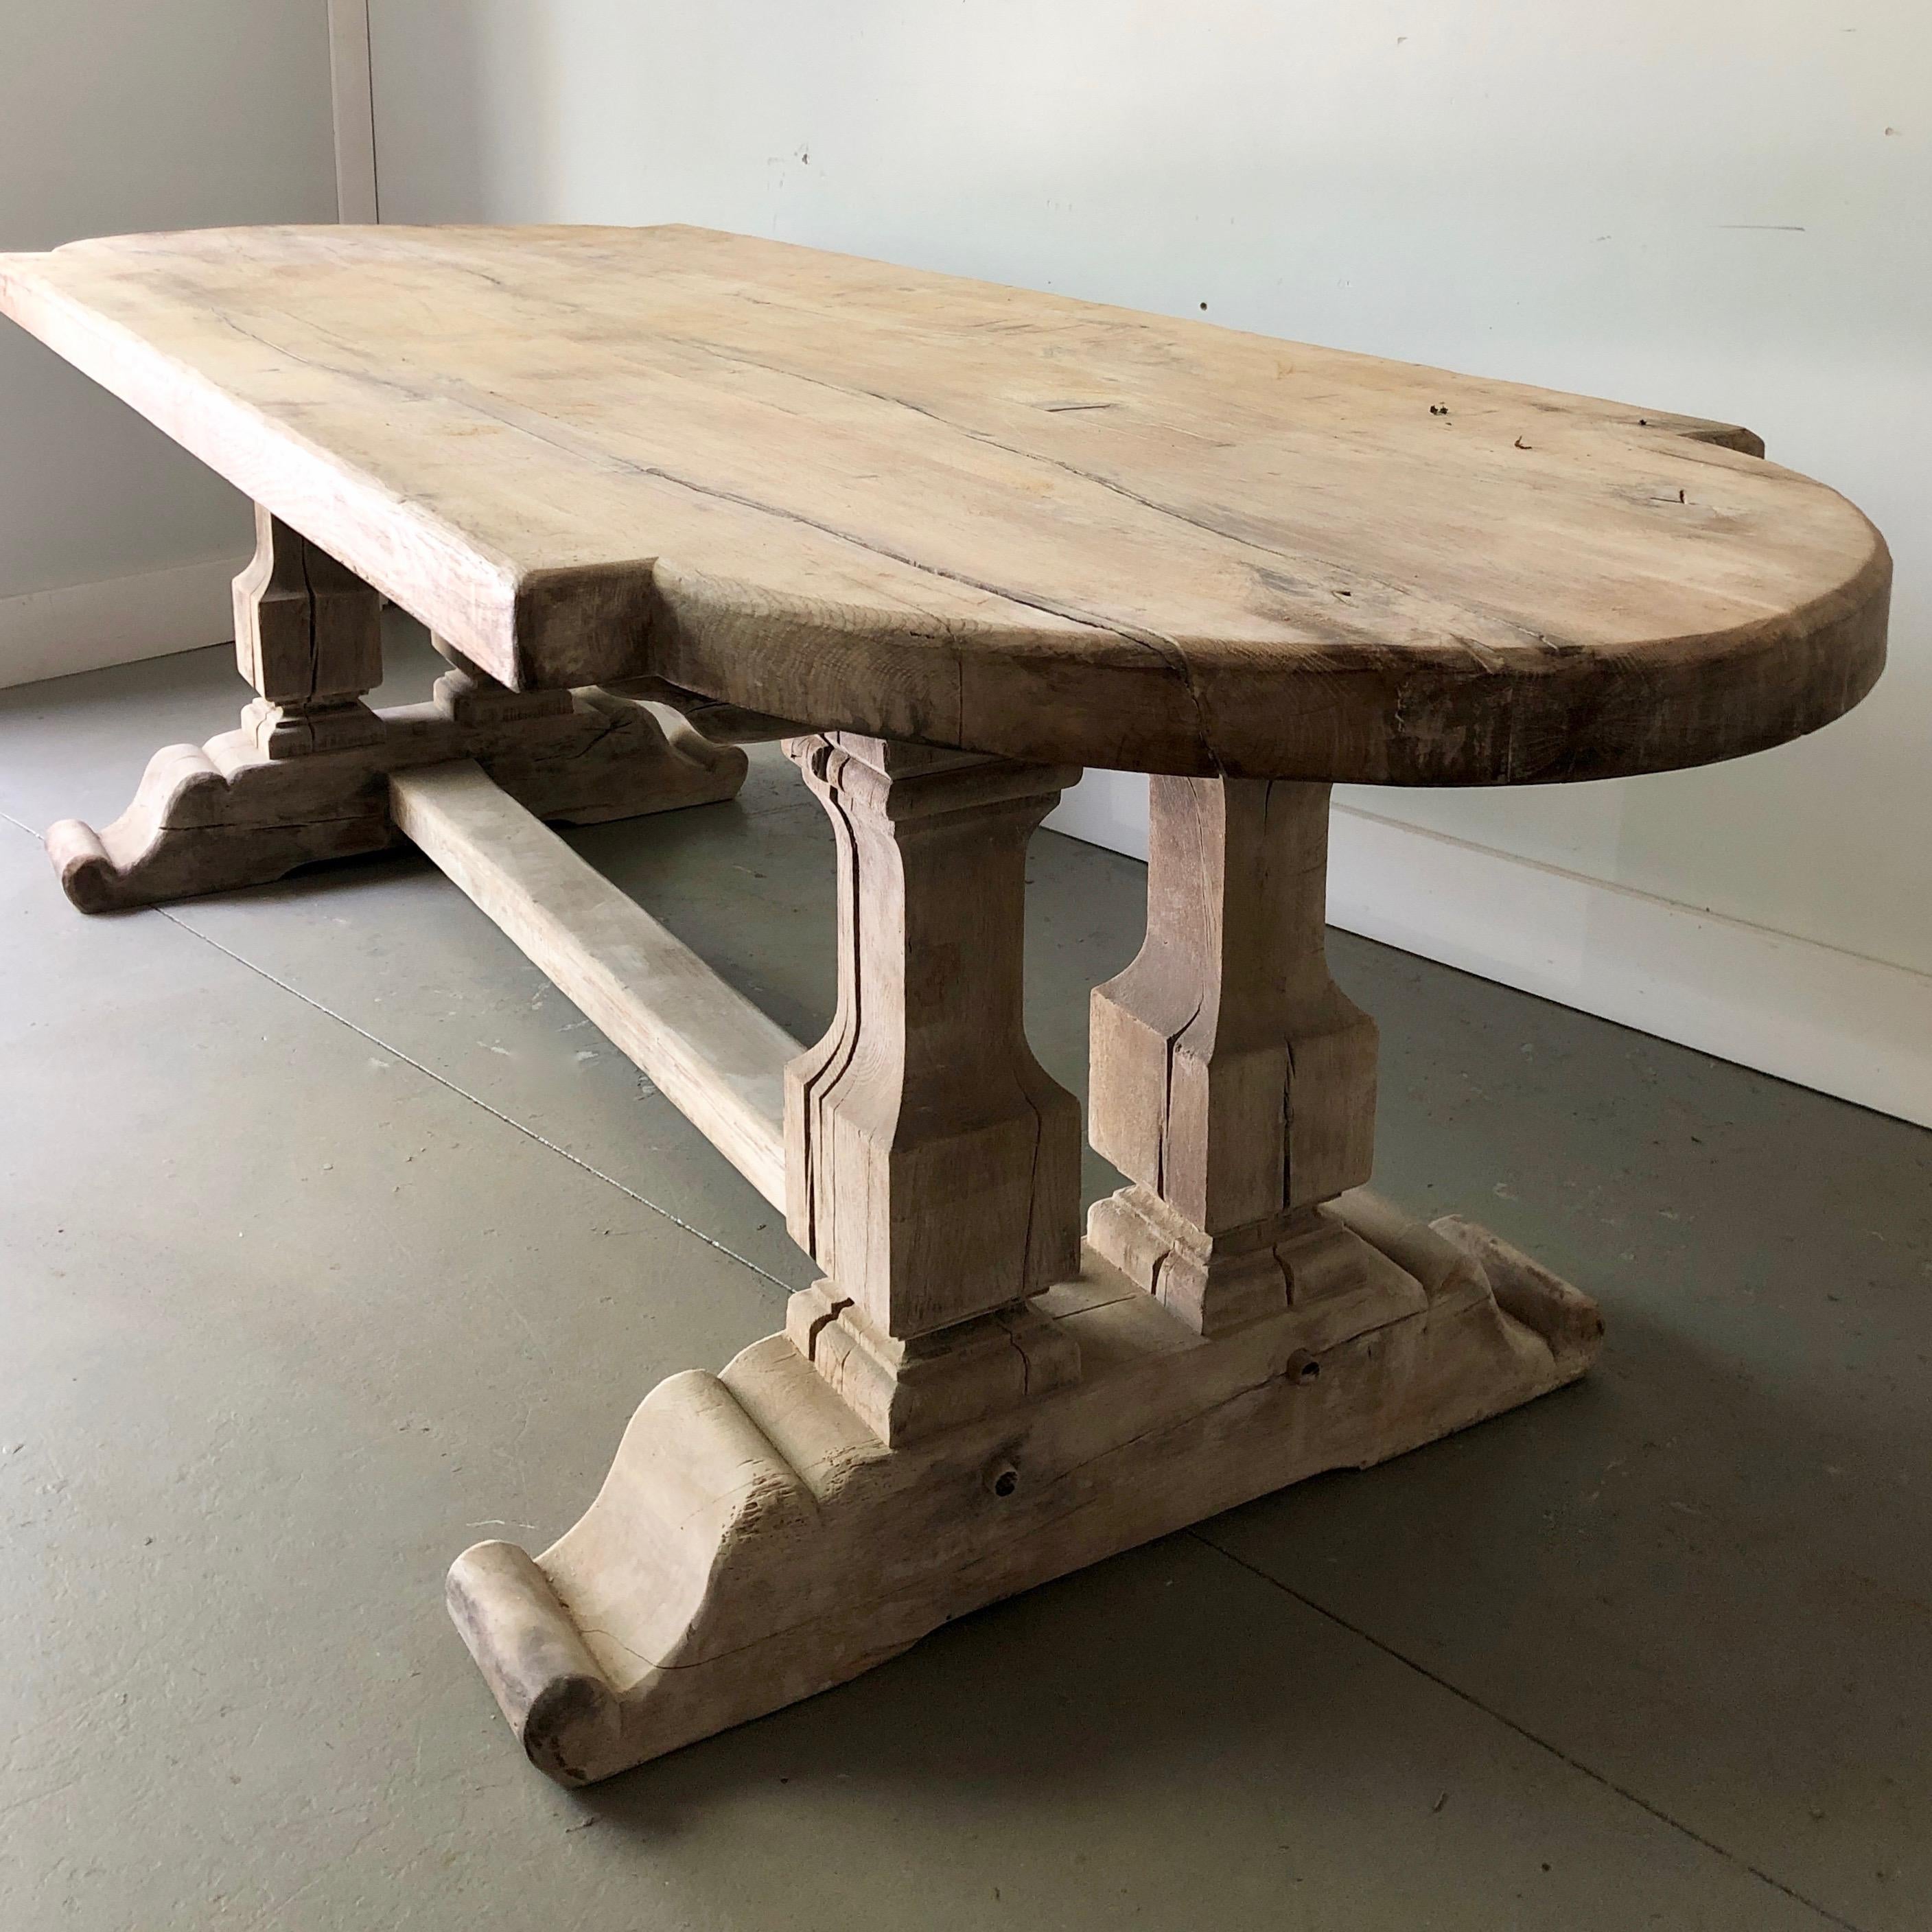 19th century French Monastery table with very thick and heavy shaped oak top is supported by a pair of trestle legs and the beam of the H-shaped stretcher.